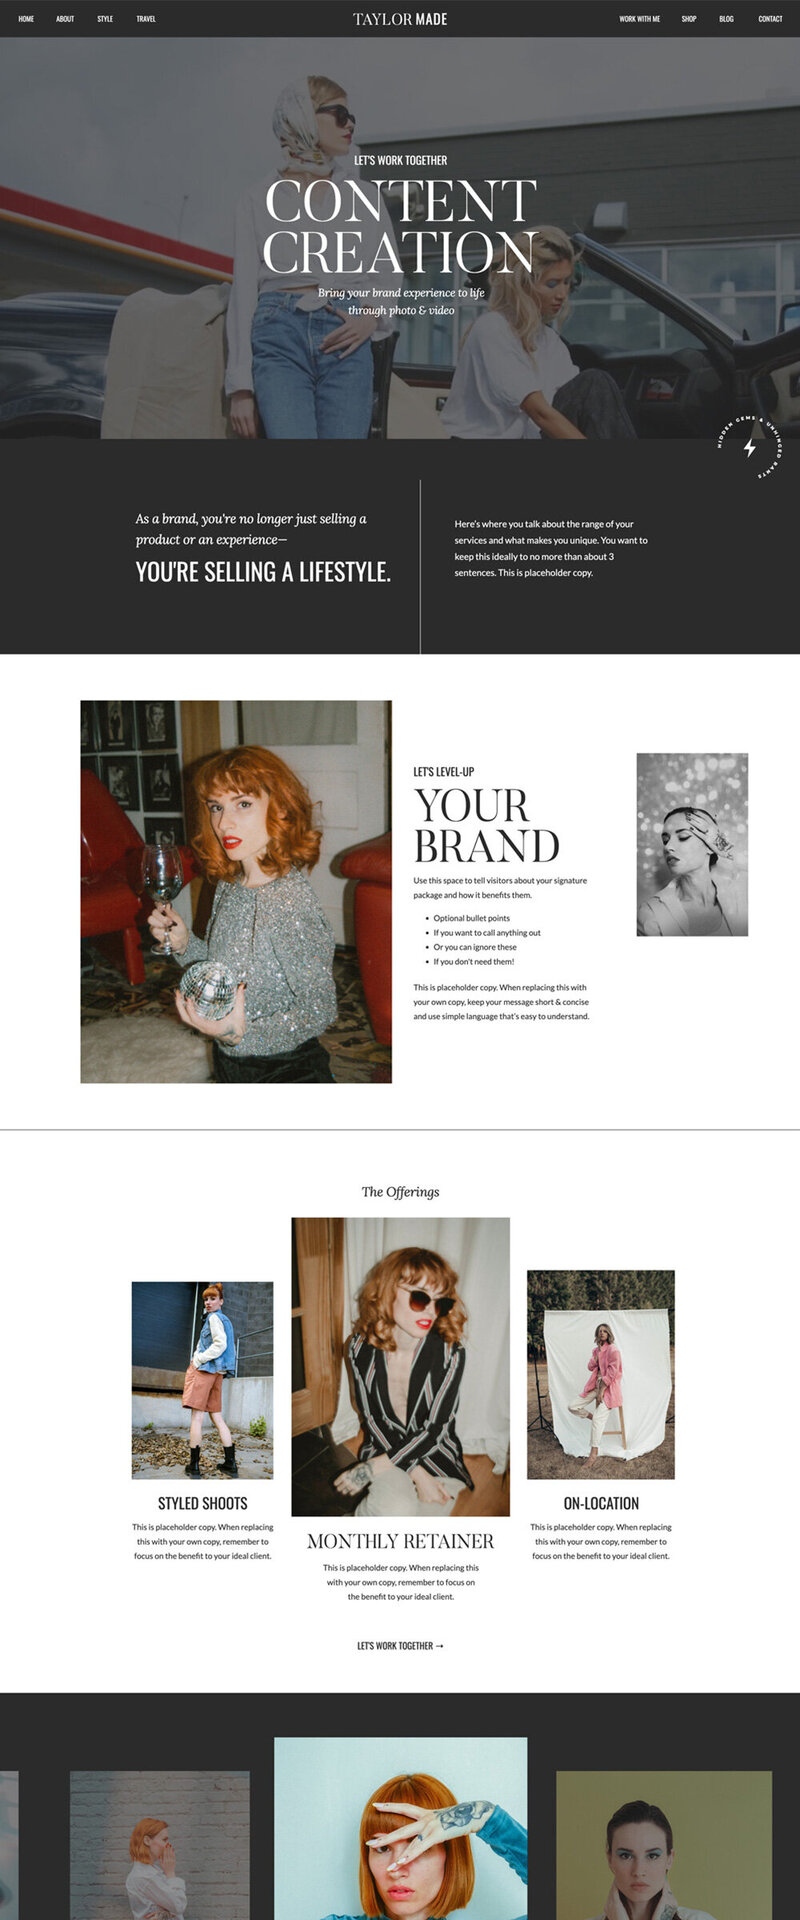 Showit-Website-Template-for-Content-Creators-and-Bloggers_Taylor-Made_Services-Cropped